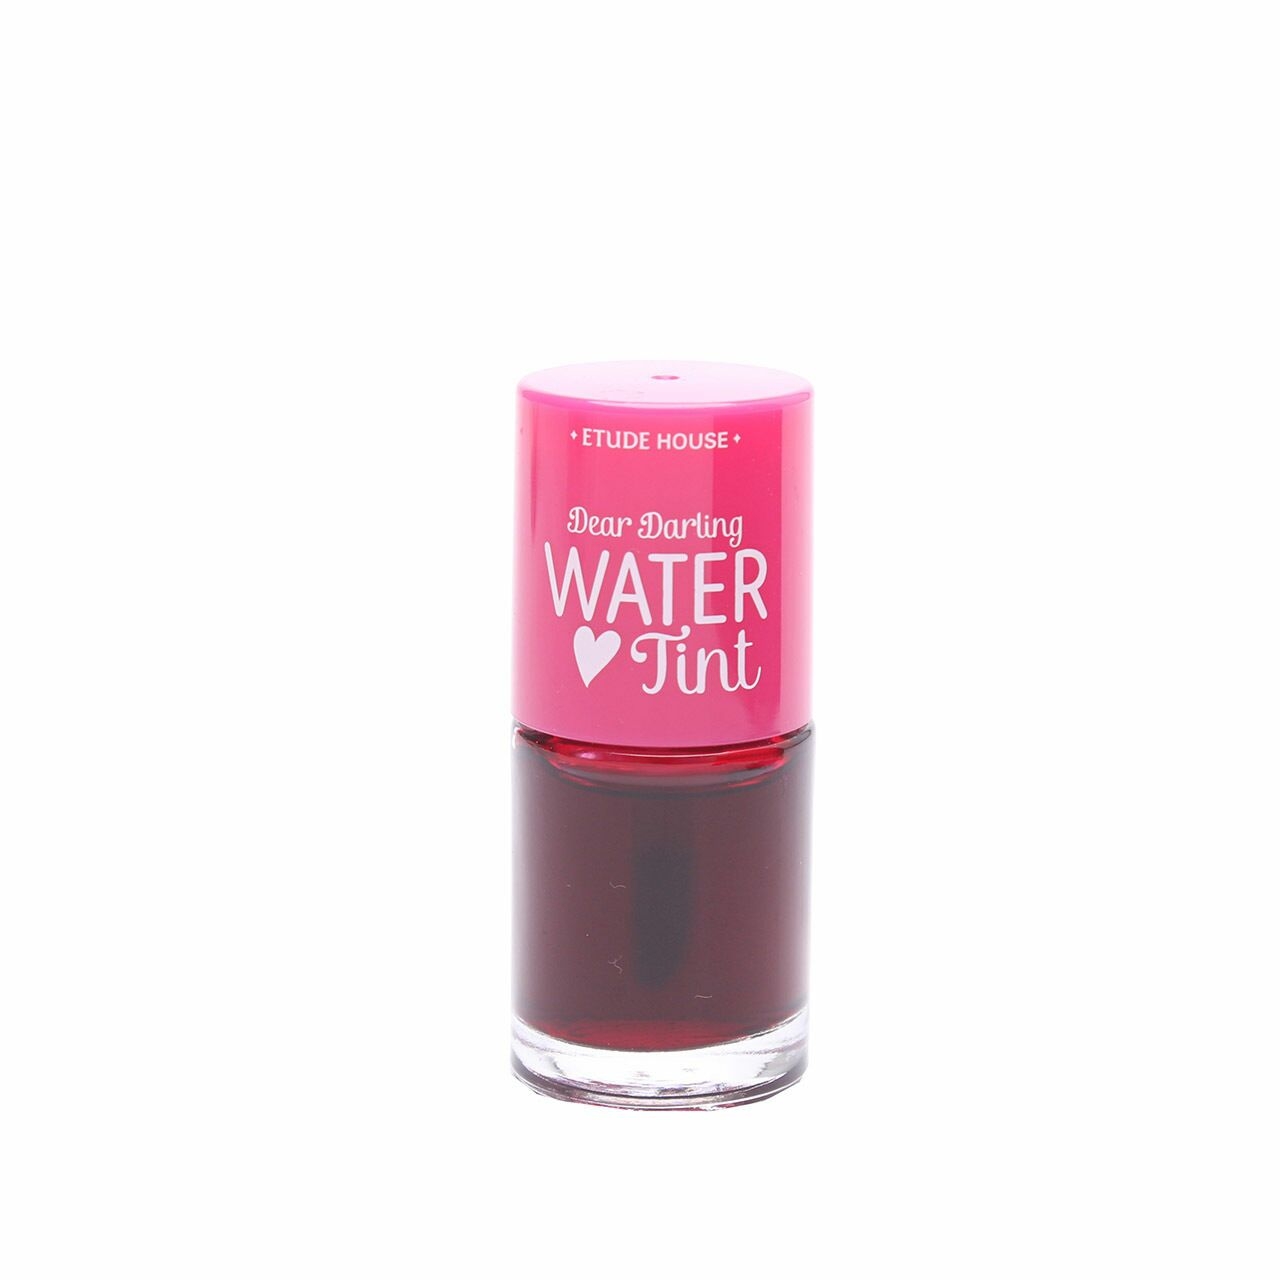 Etude House Dear Darling Water Tint 01 Strawberry Ade Lips